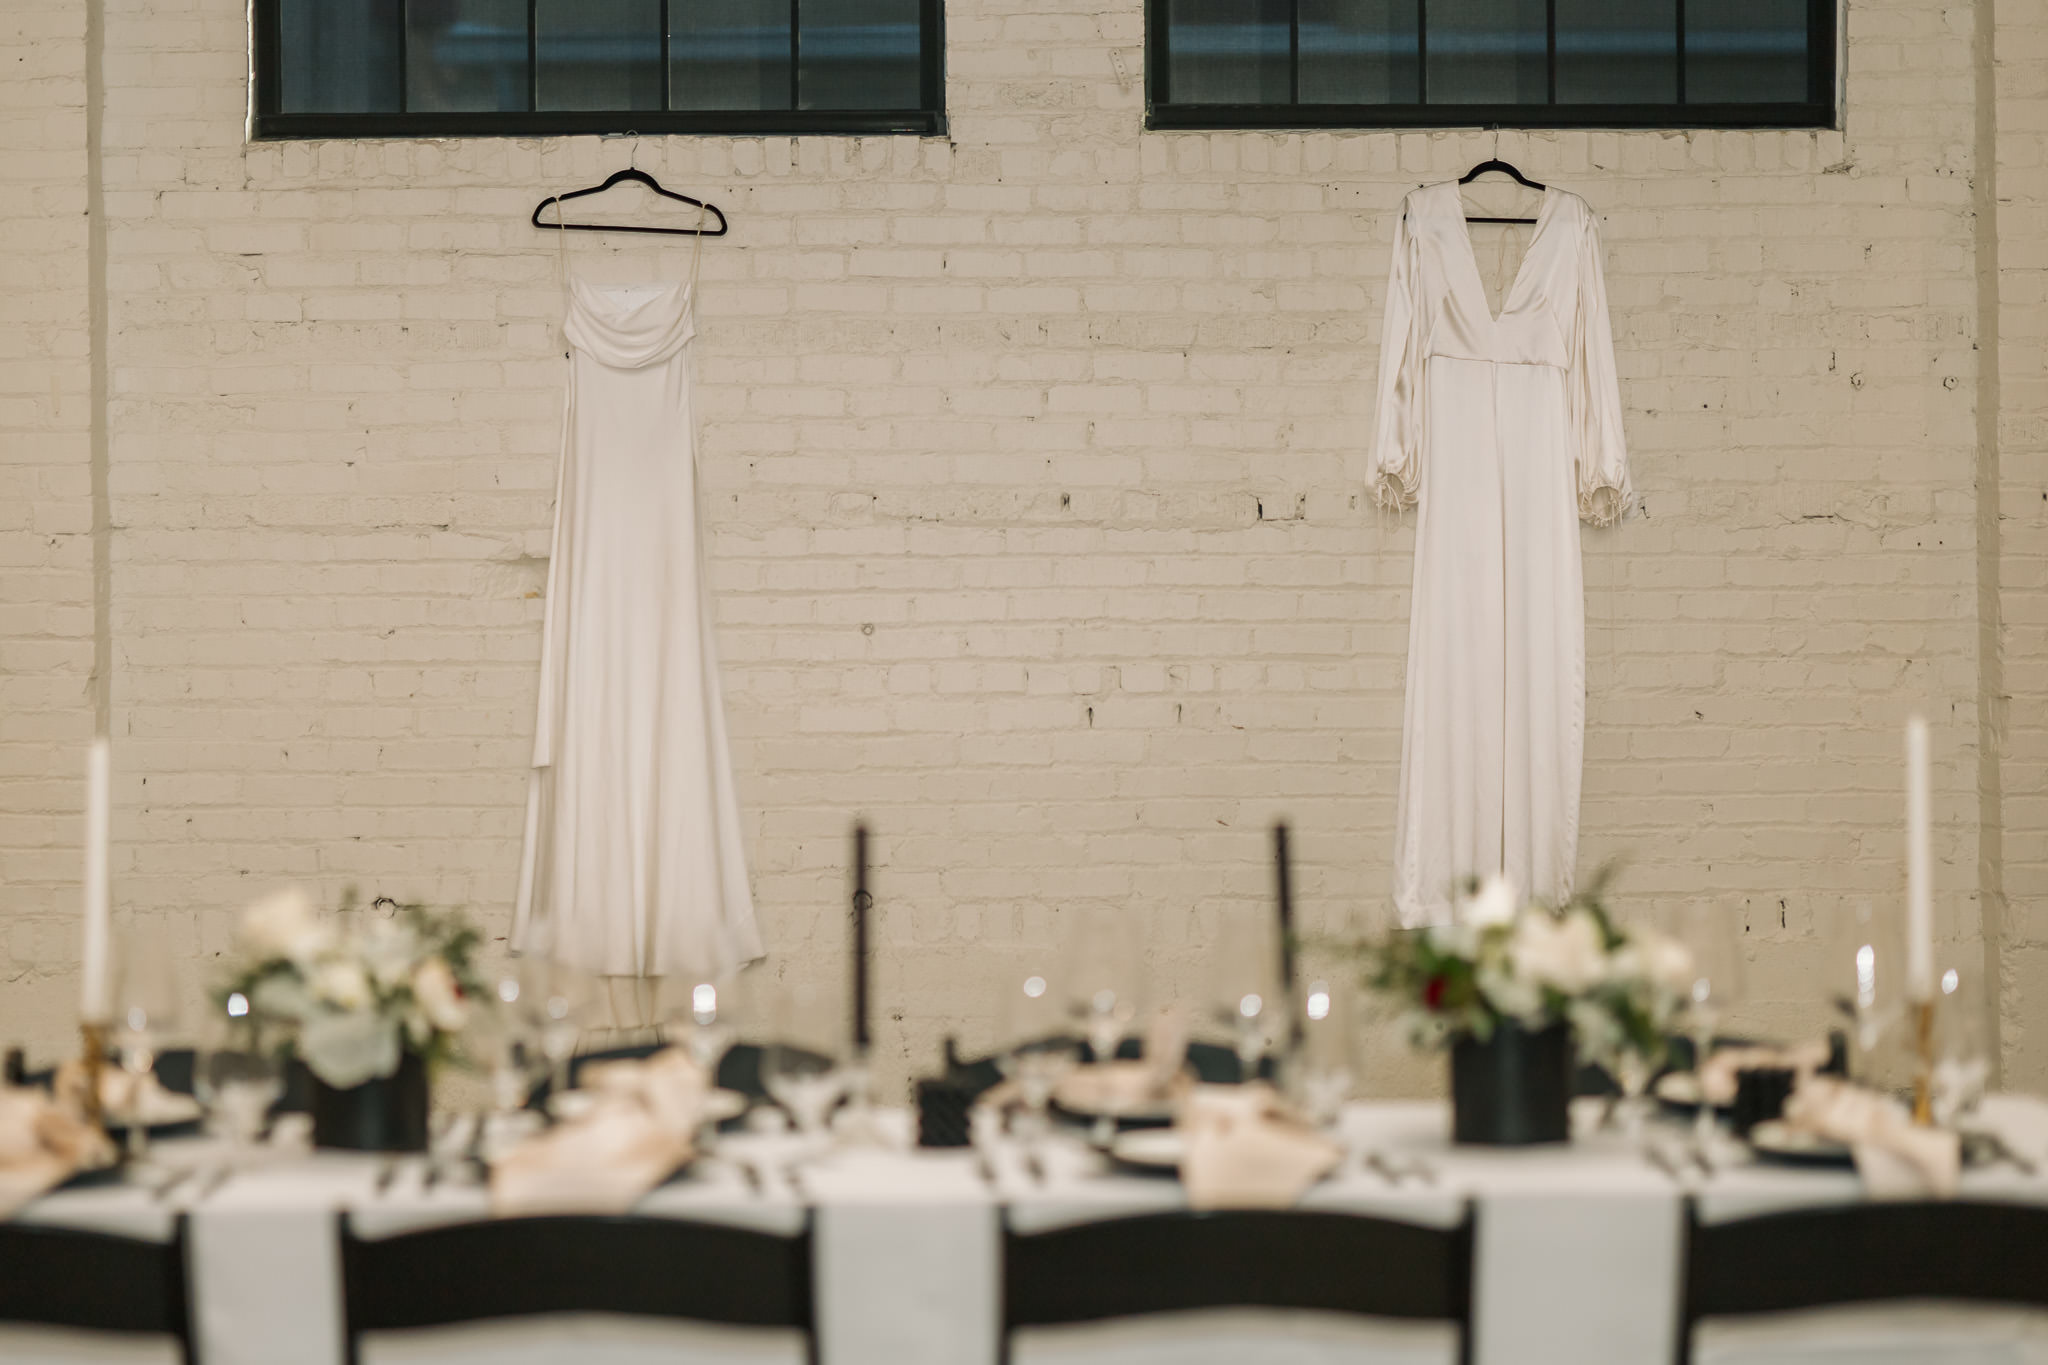 planning - two brides dresses hanging on the wall